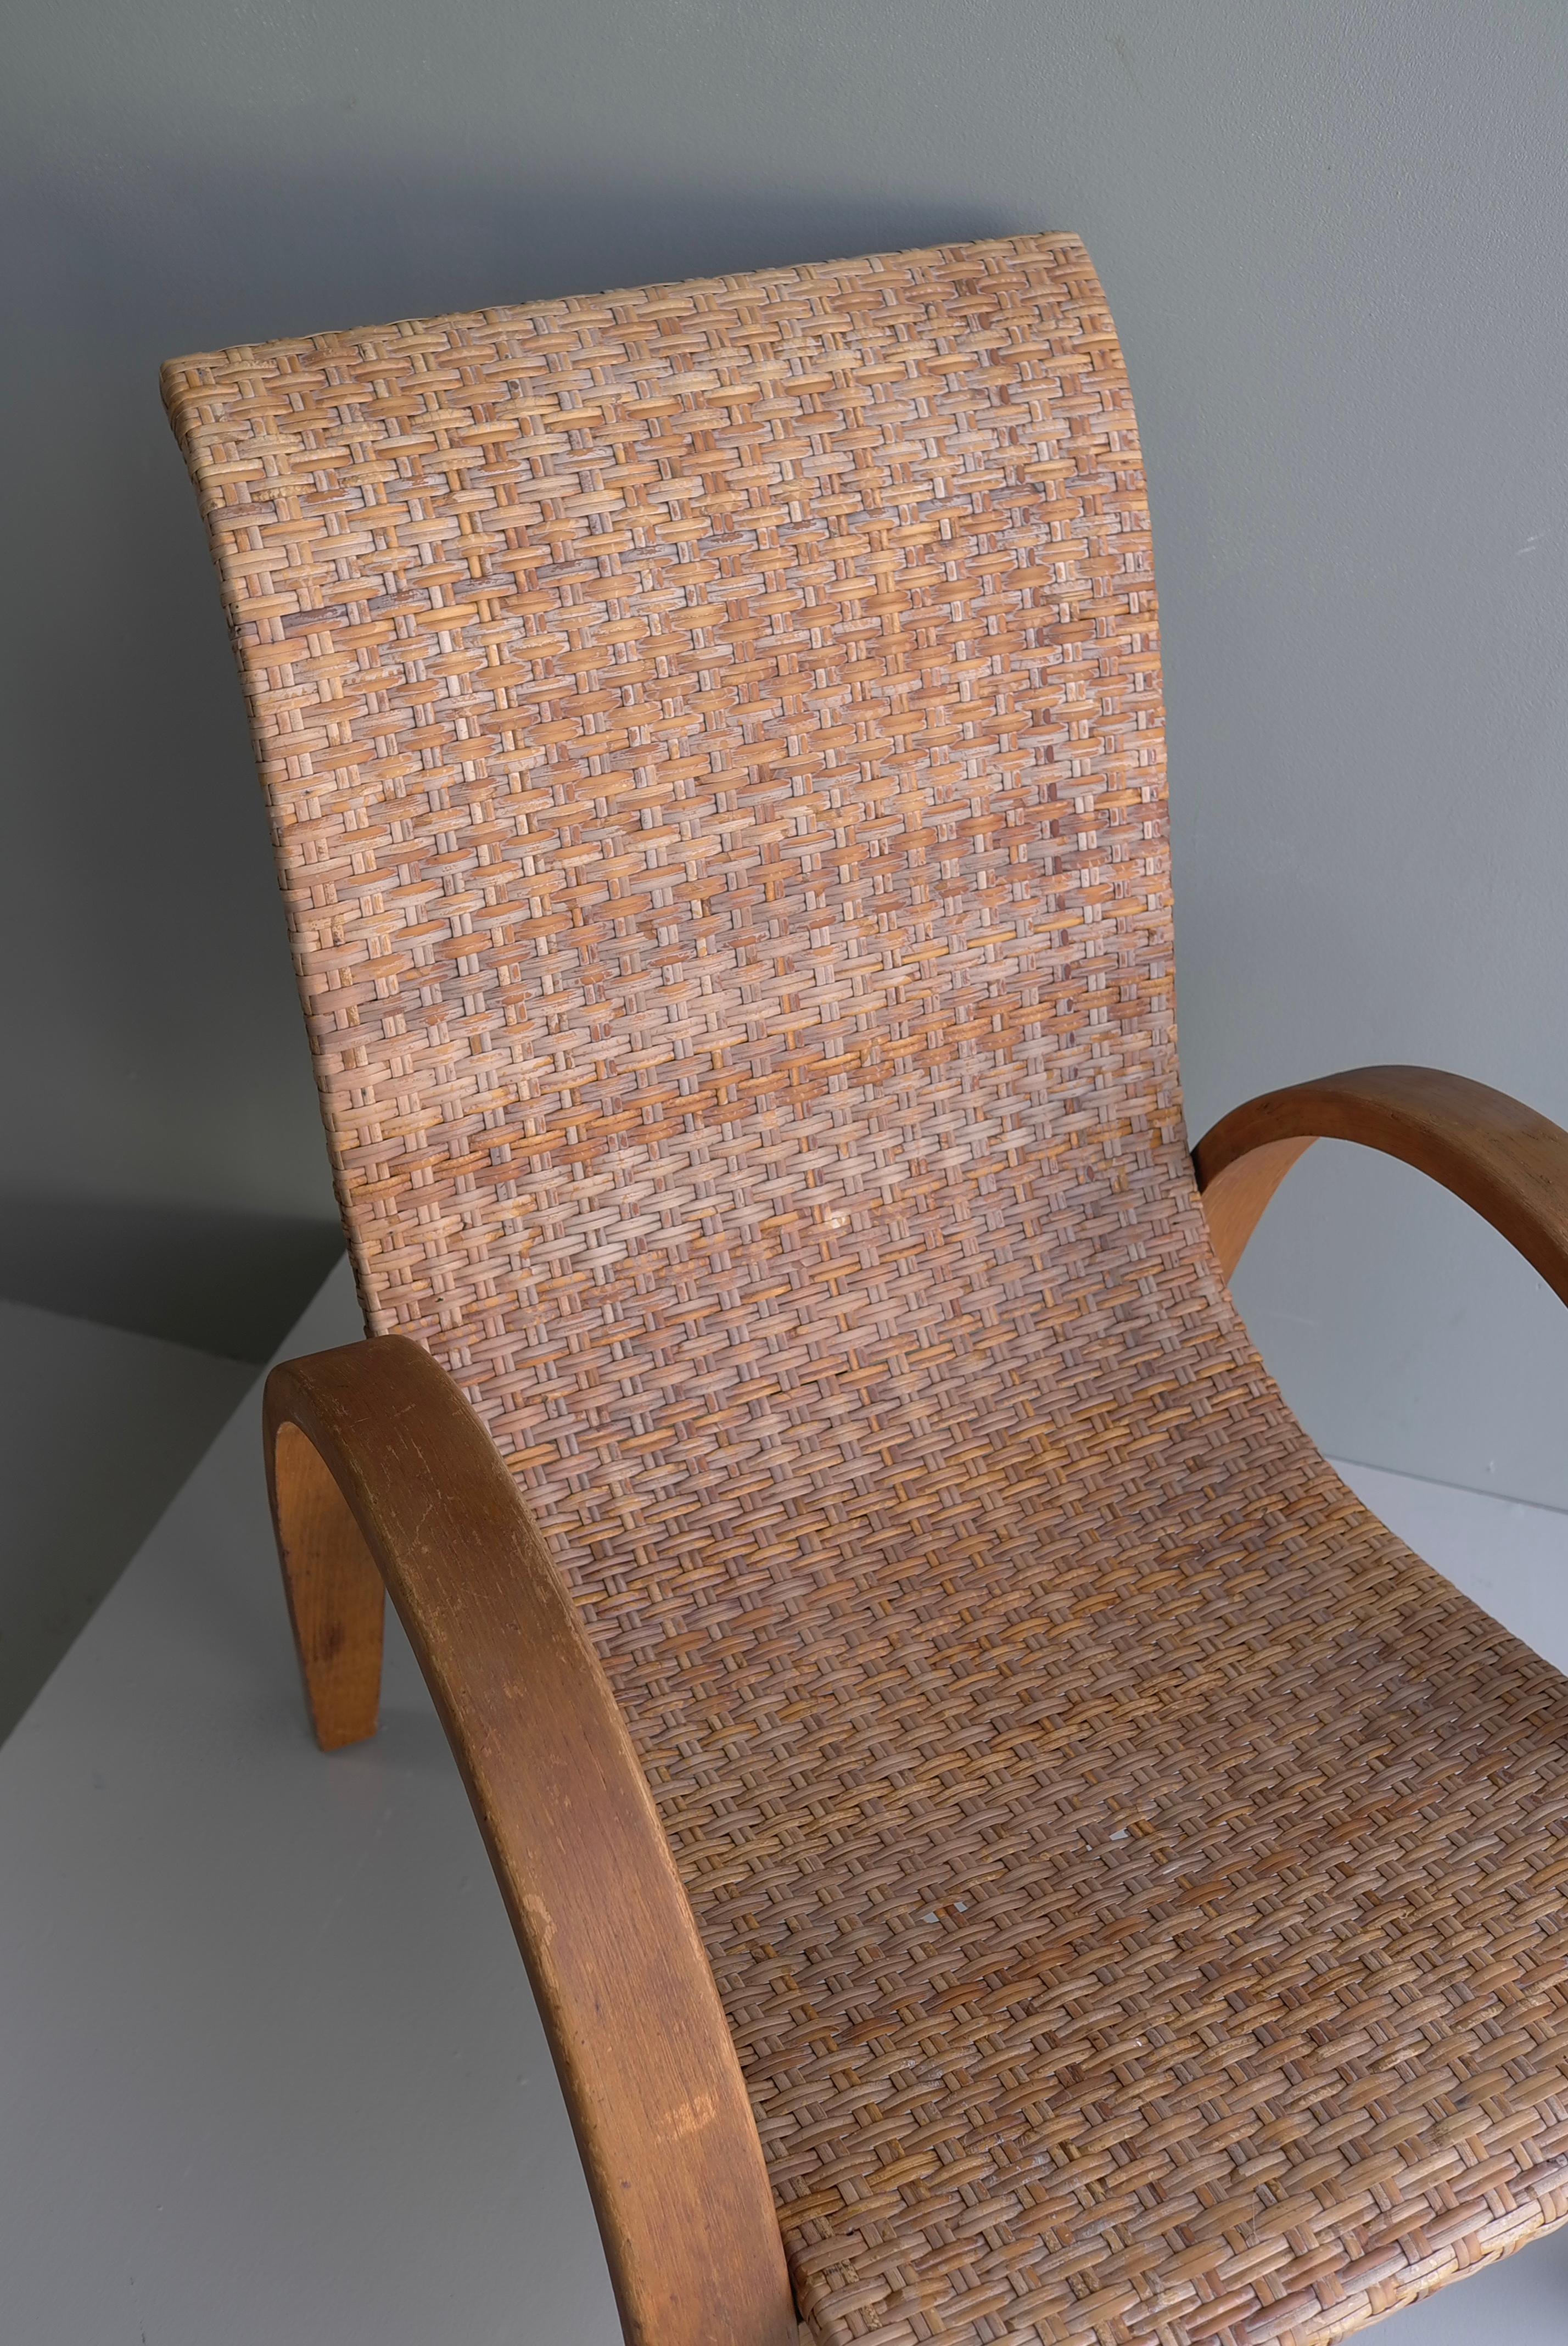 French Sculptural Mid-Century Modern Armchair in Wood and Cane, 1950's For Sale